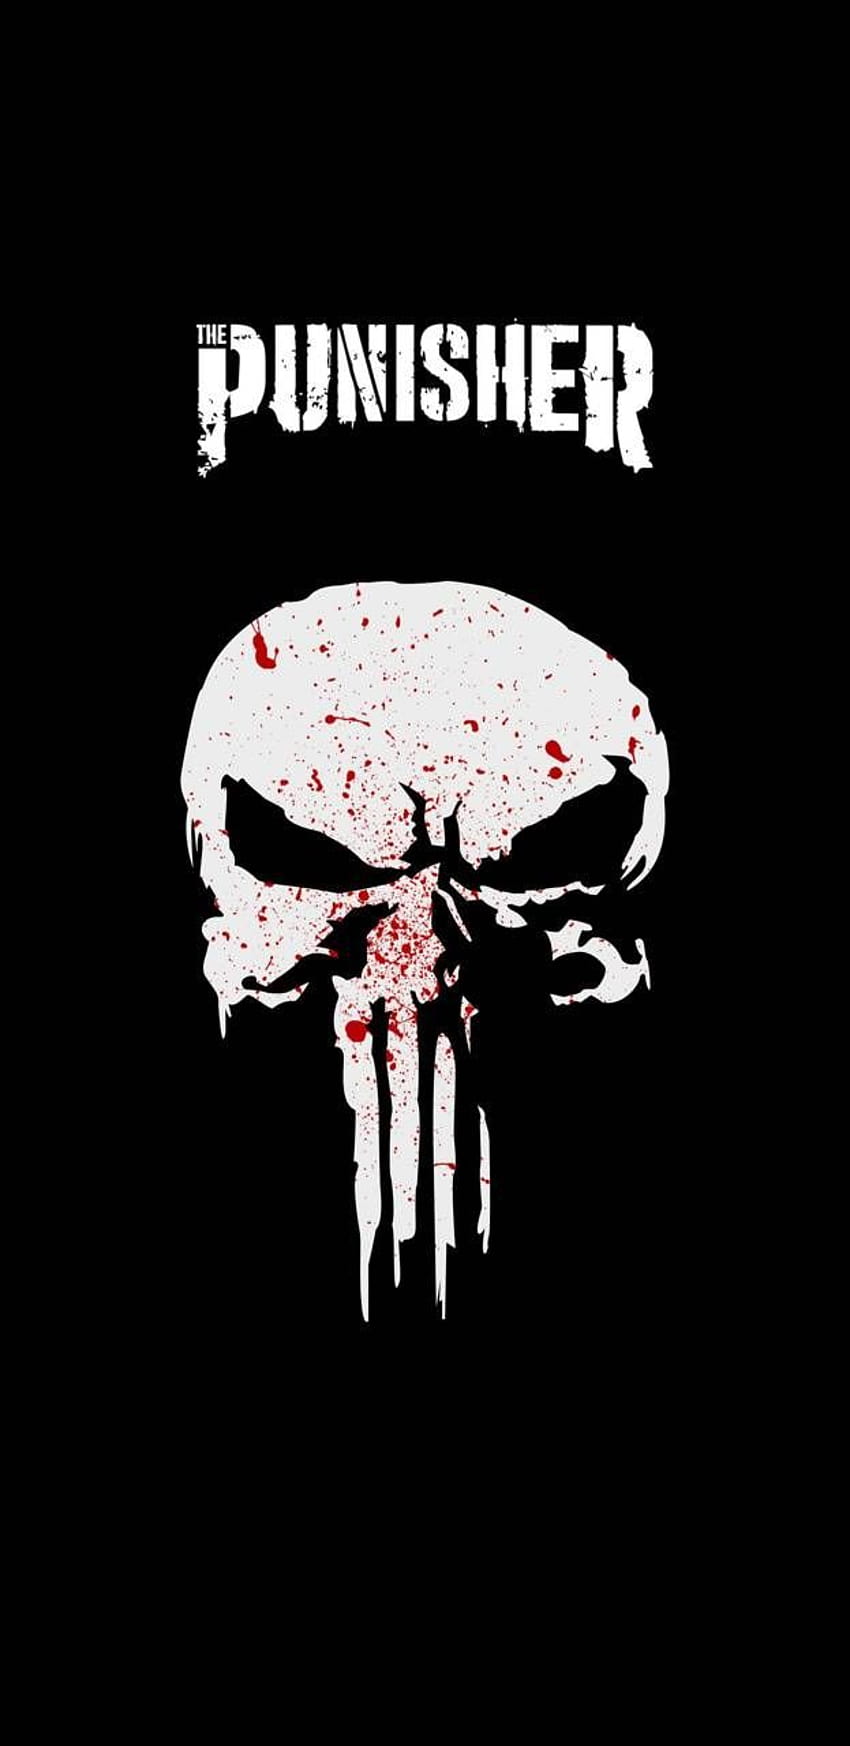 The Punisher by ShmuelRosenbluth, punisher android HD phone wallpaper